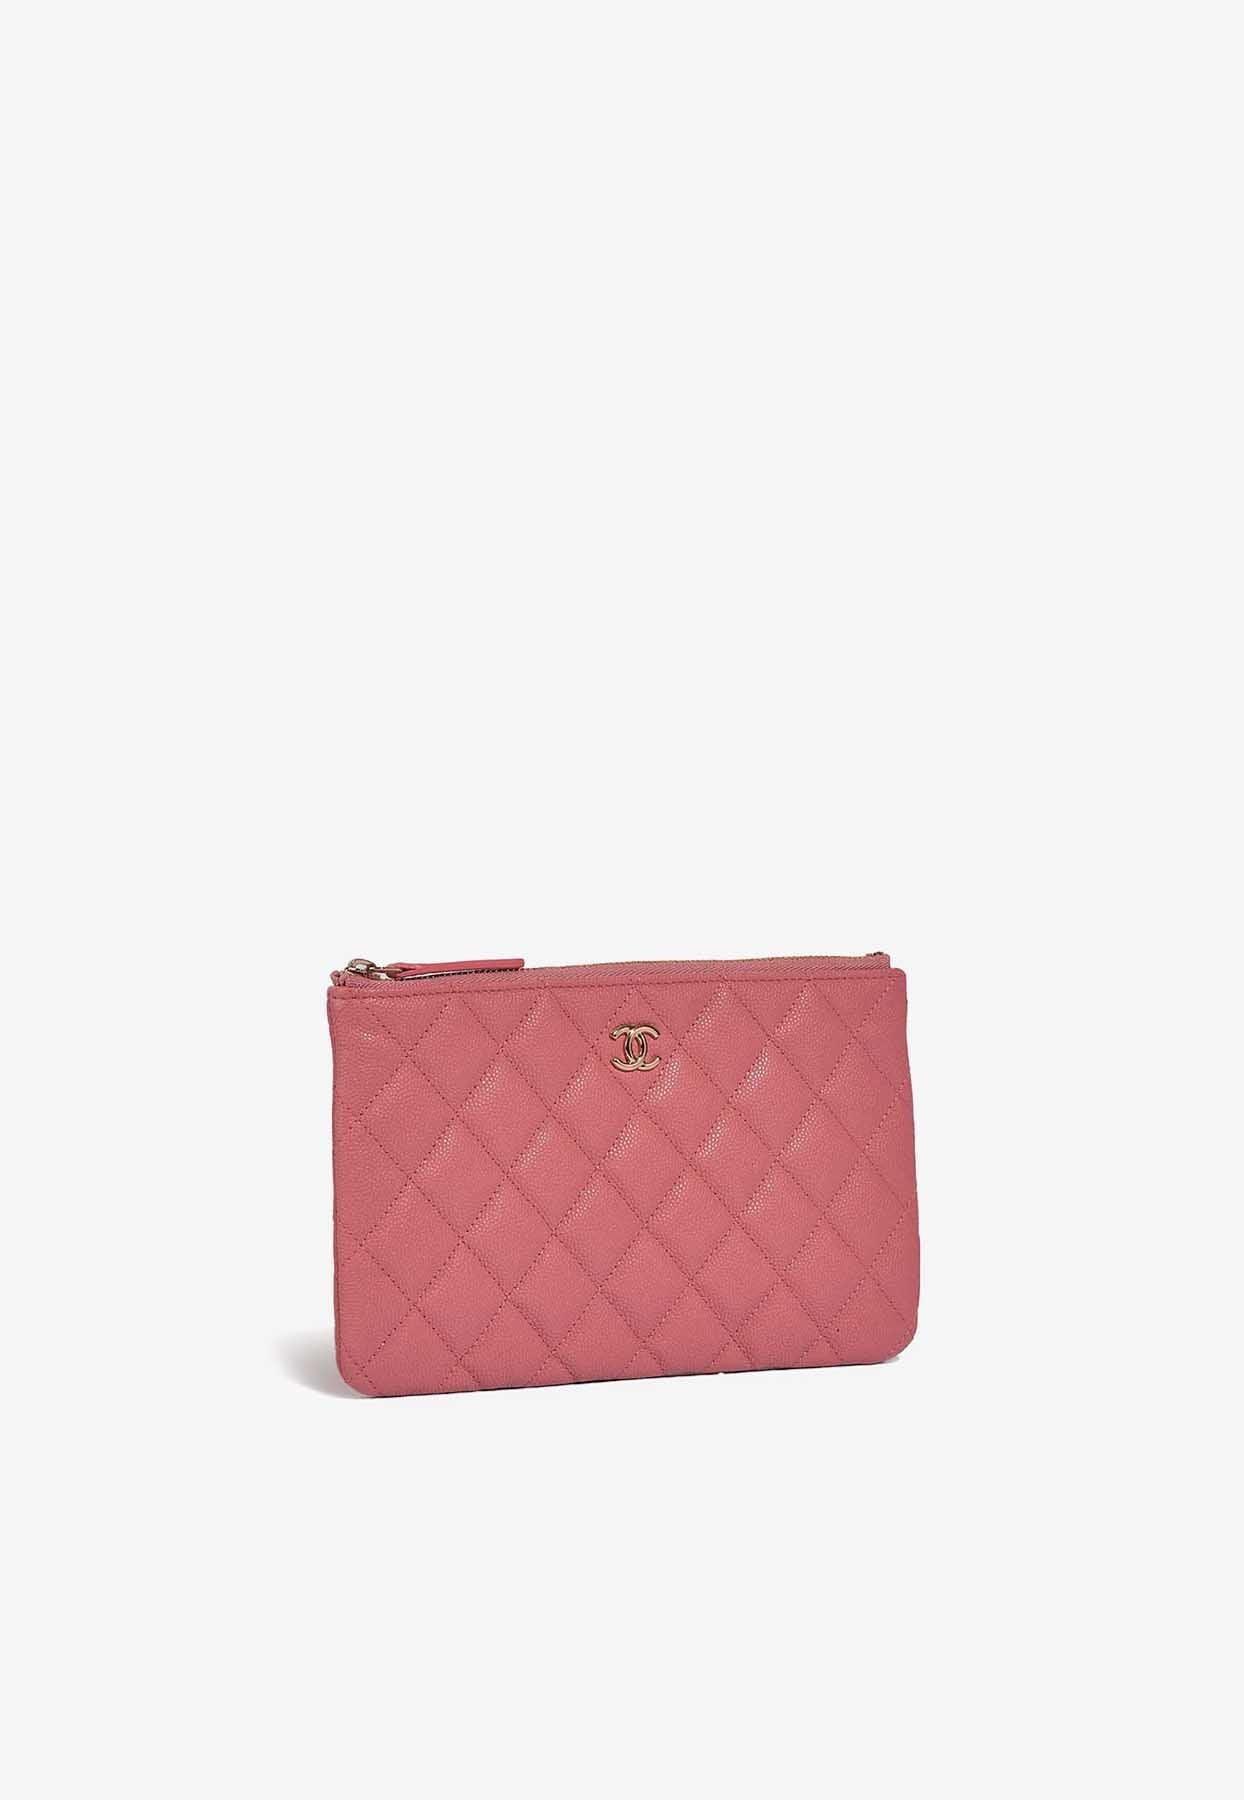 Chanel Timeless Clutch Bag In Rose Caviar Leather With Pale Gold